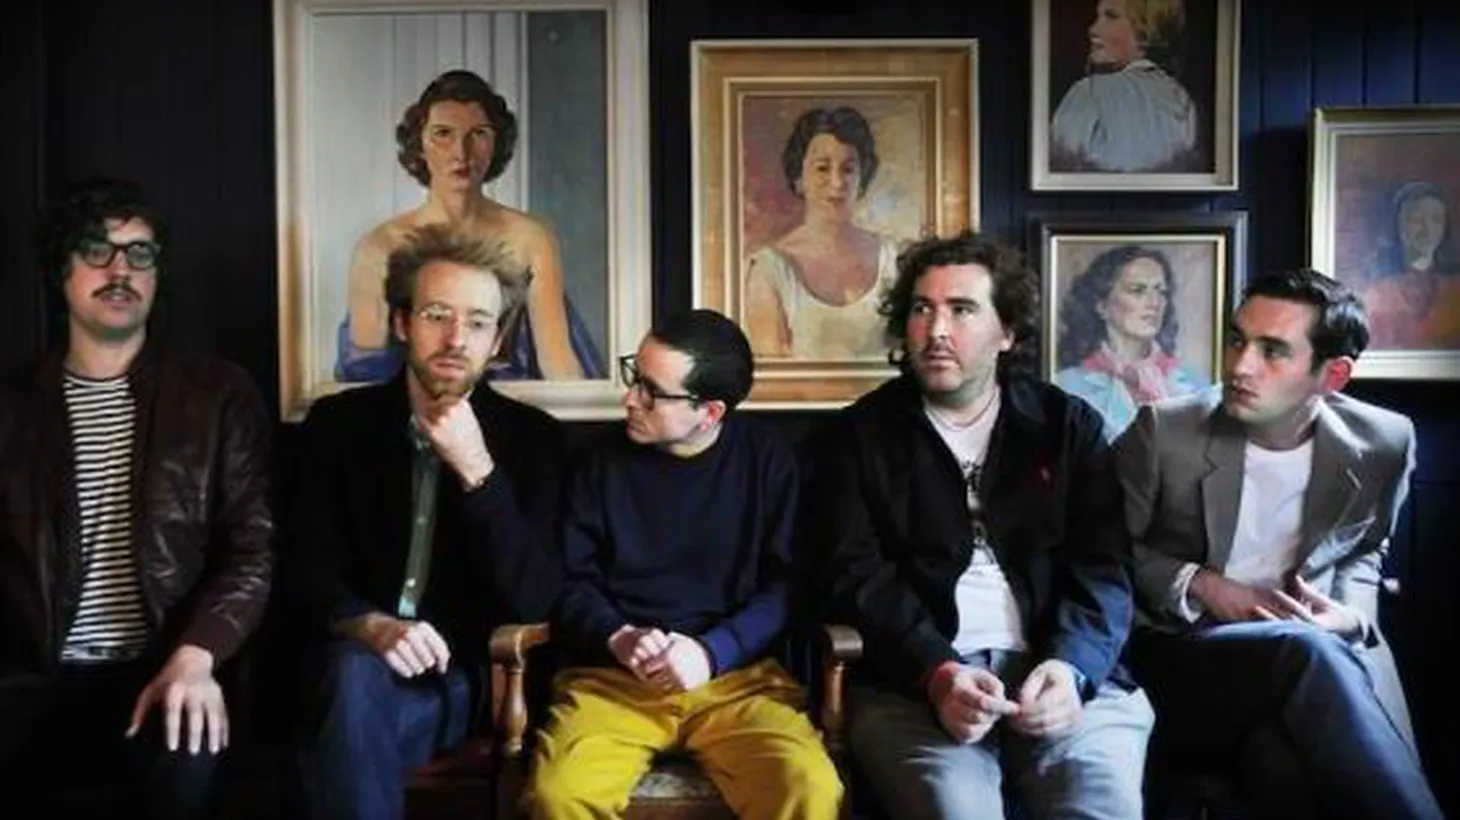 Featured artists on many Top 10 lists of 2010, Hot Chip perform highlights from their album One Life Stand for Morning Becomes Eclectic listeners at 11:15am.